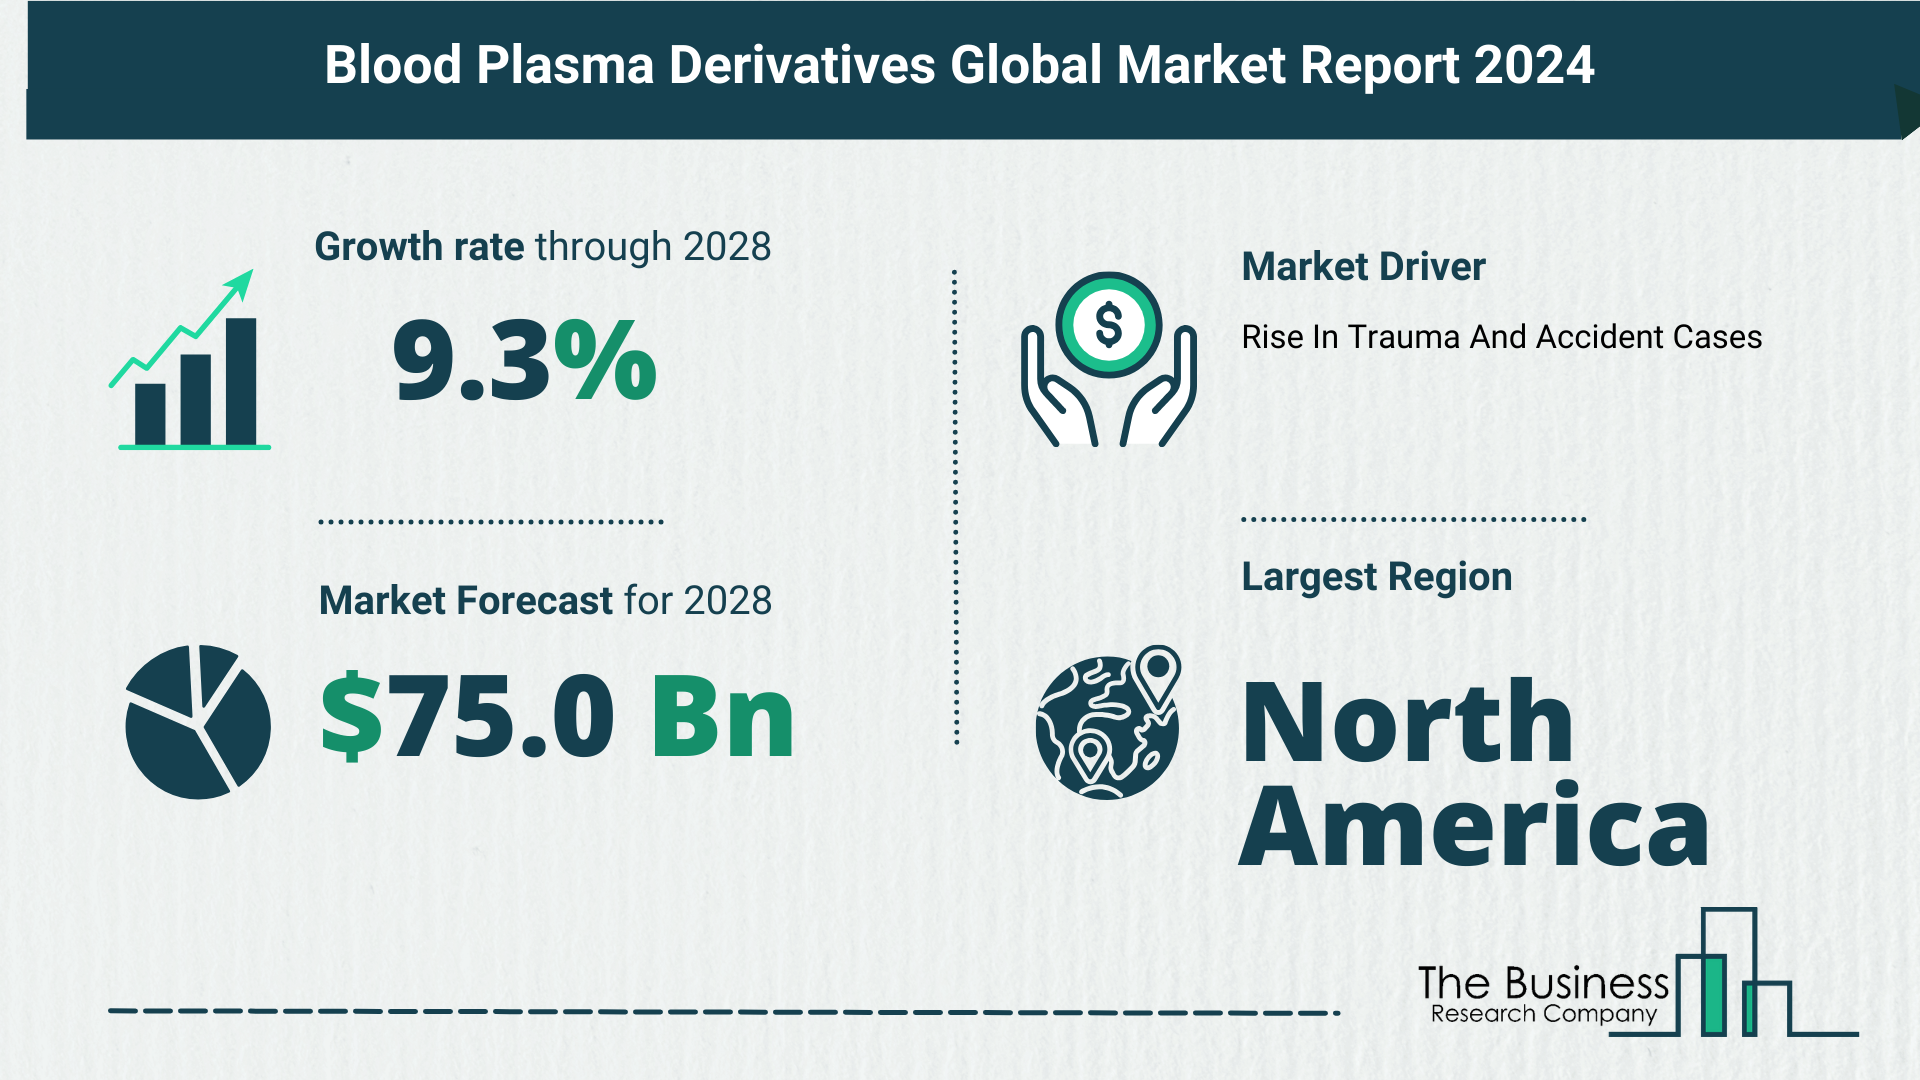 What Is The Forecast Growth Rate For The Blood Plasma Derivatives Market?